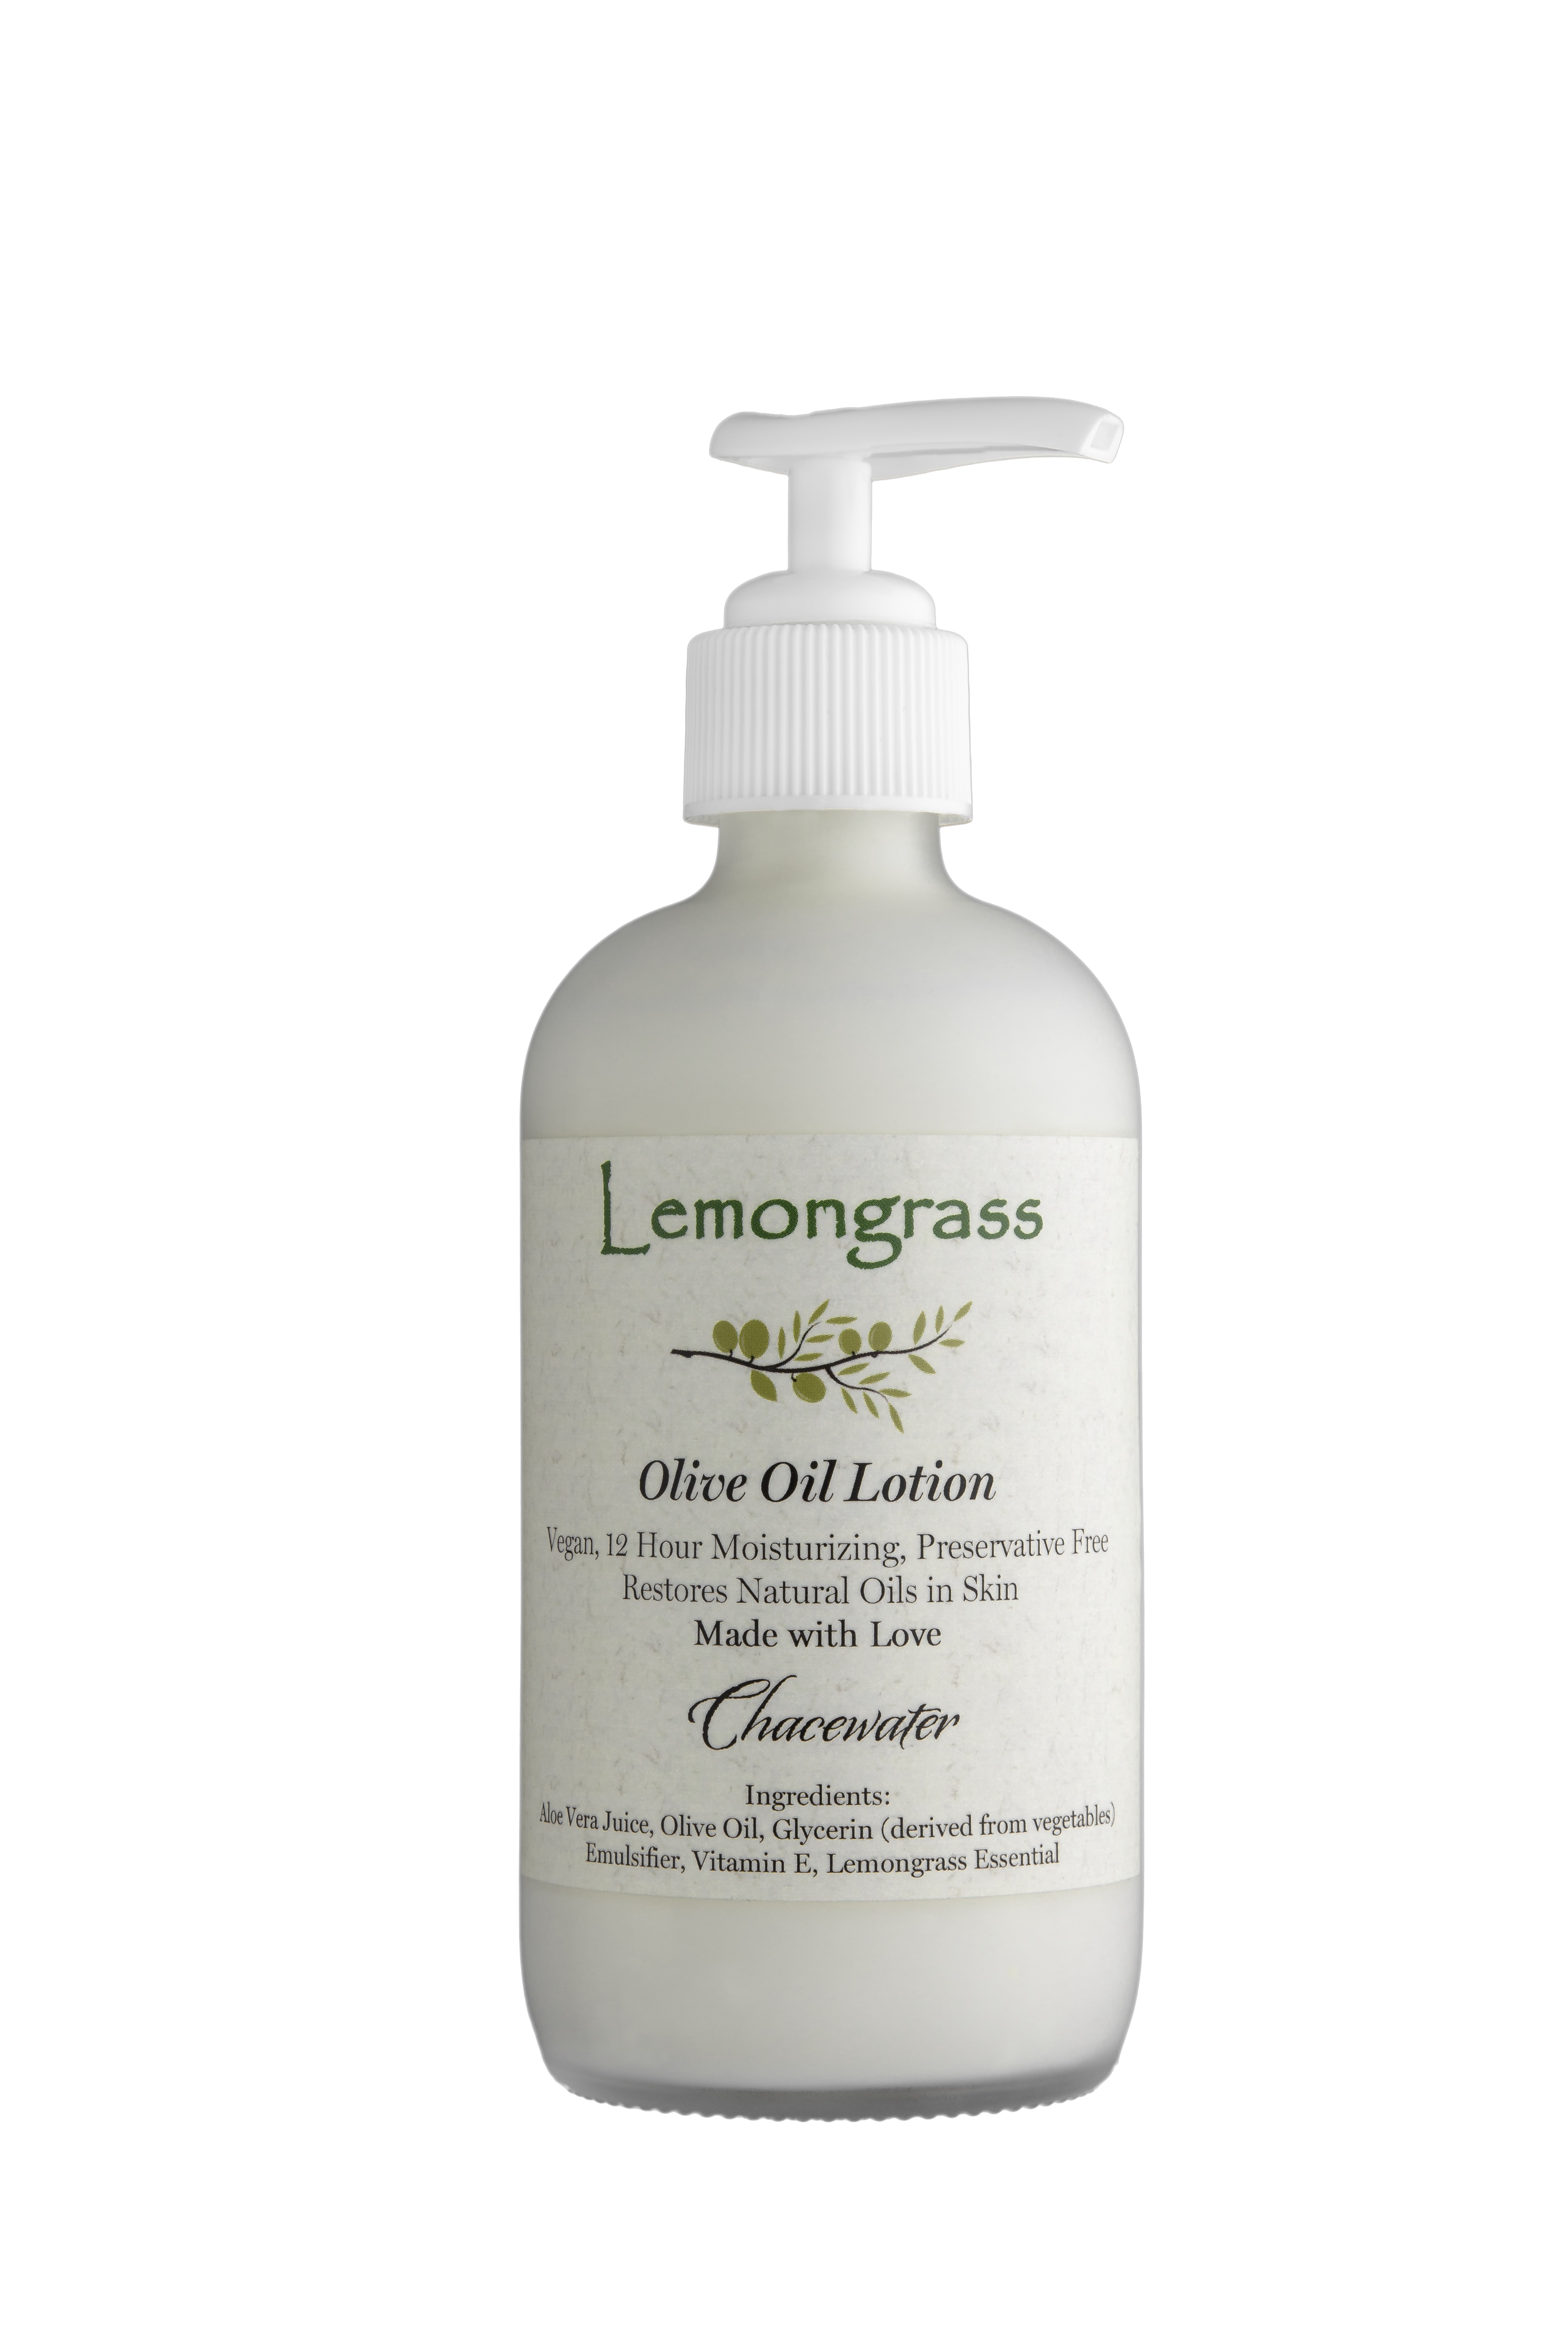 Product Image for Lemongrass Olive Oil Lotion